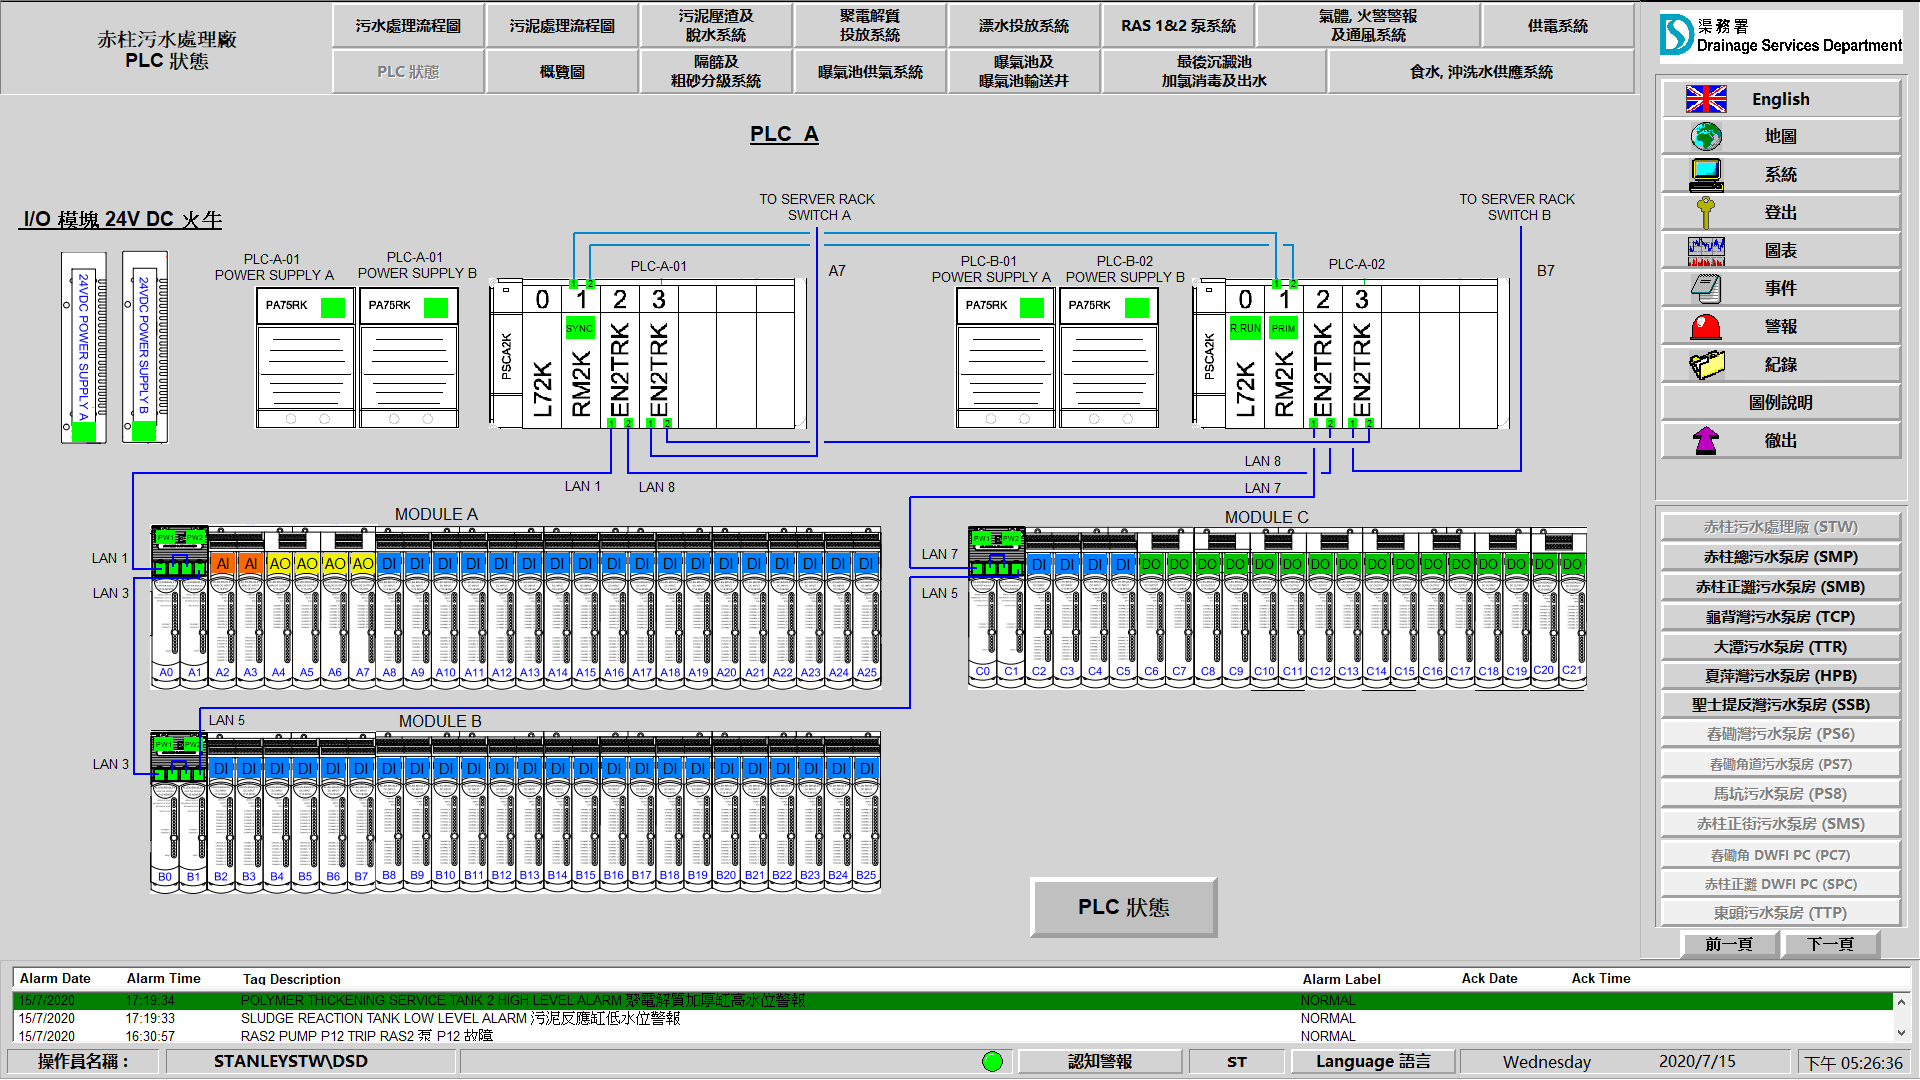 New PLC System I/O configuration & Status screenshot from FactoryTalk View After Works in DSD Stanley STW (Typical)